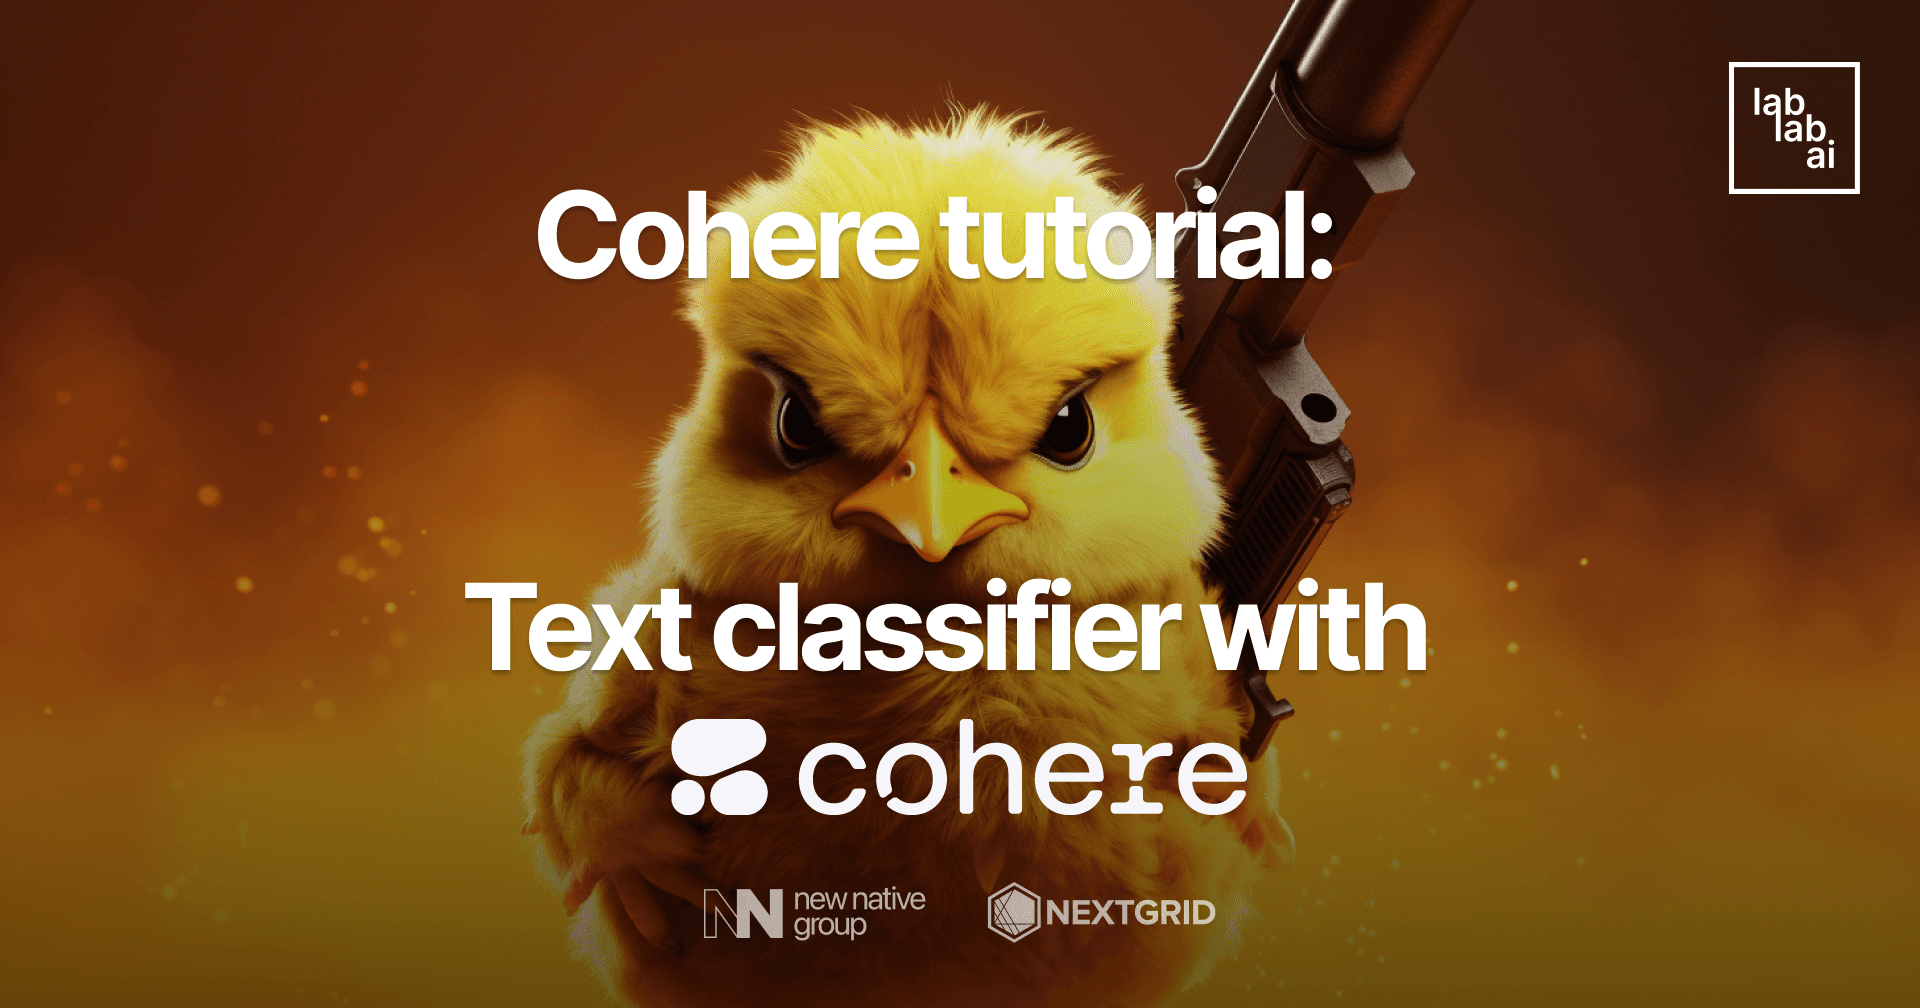 Cohere tutorial: Text classifier with Cohere